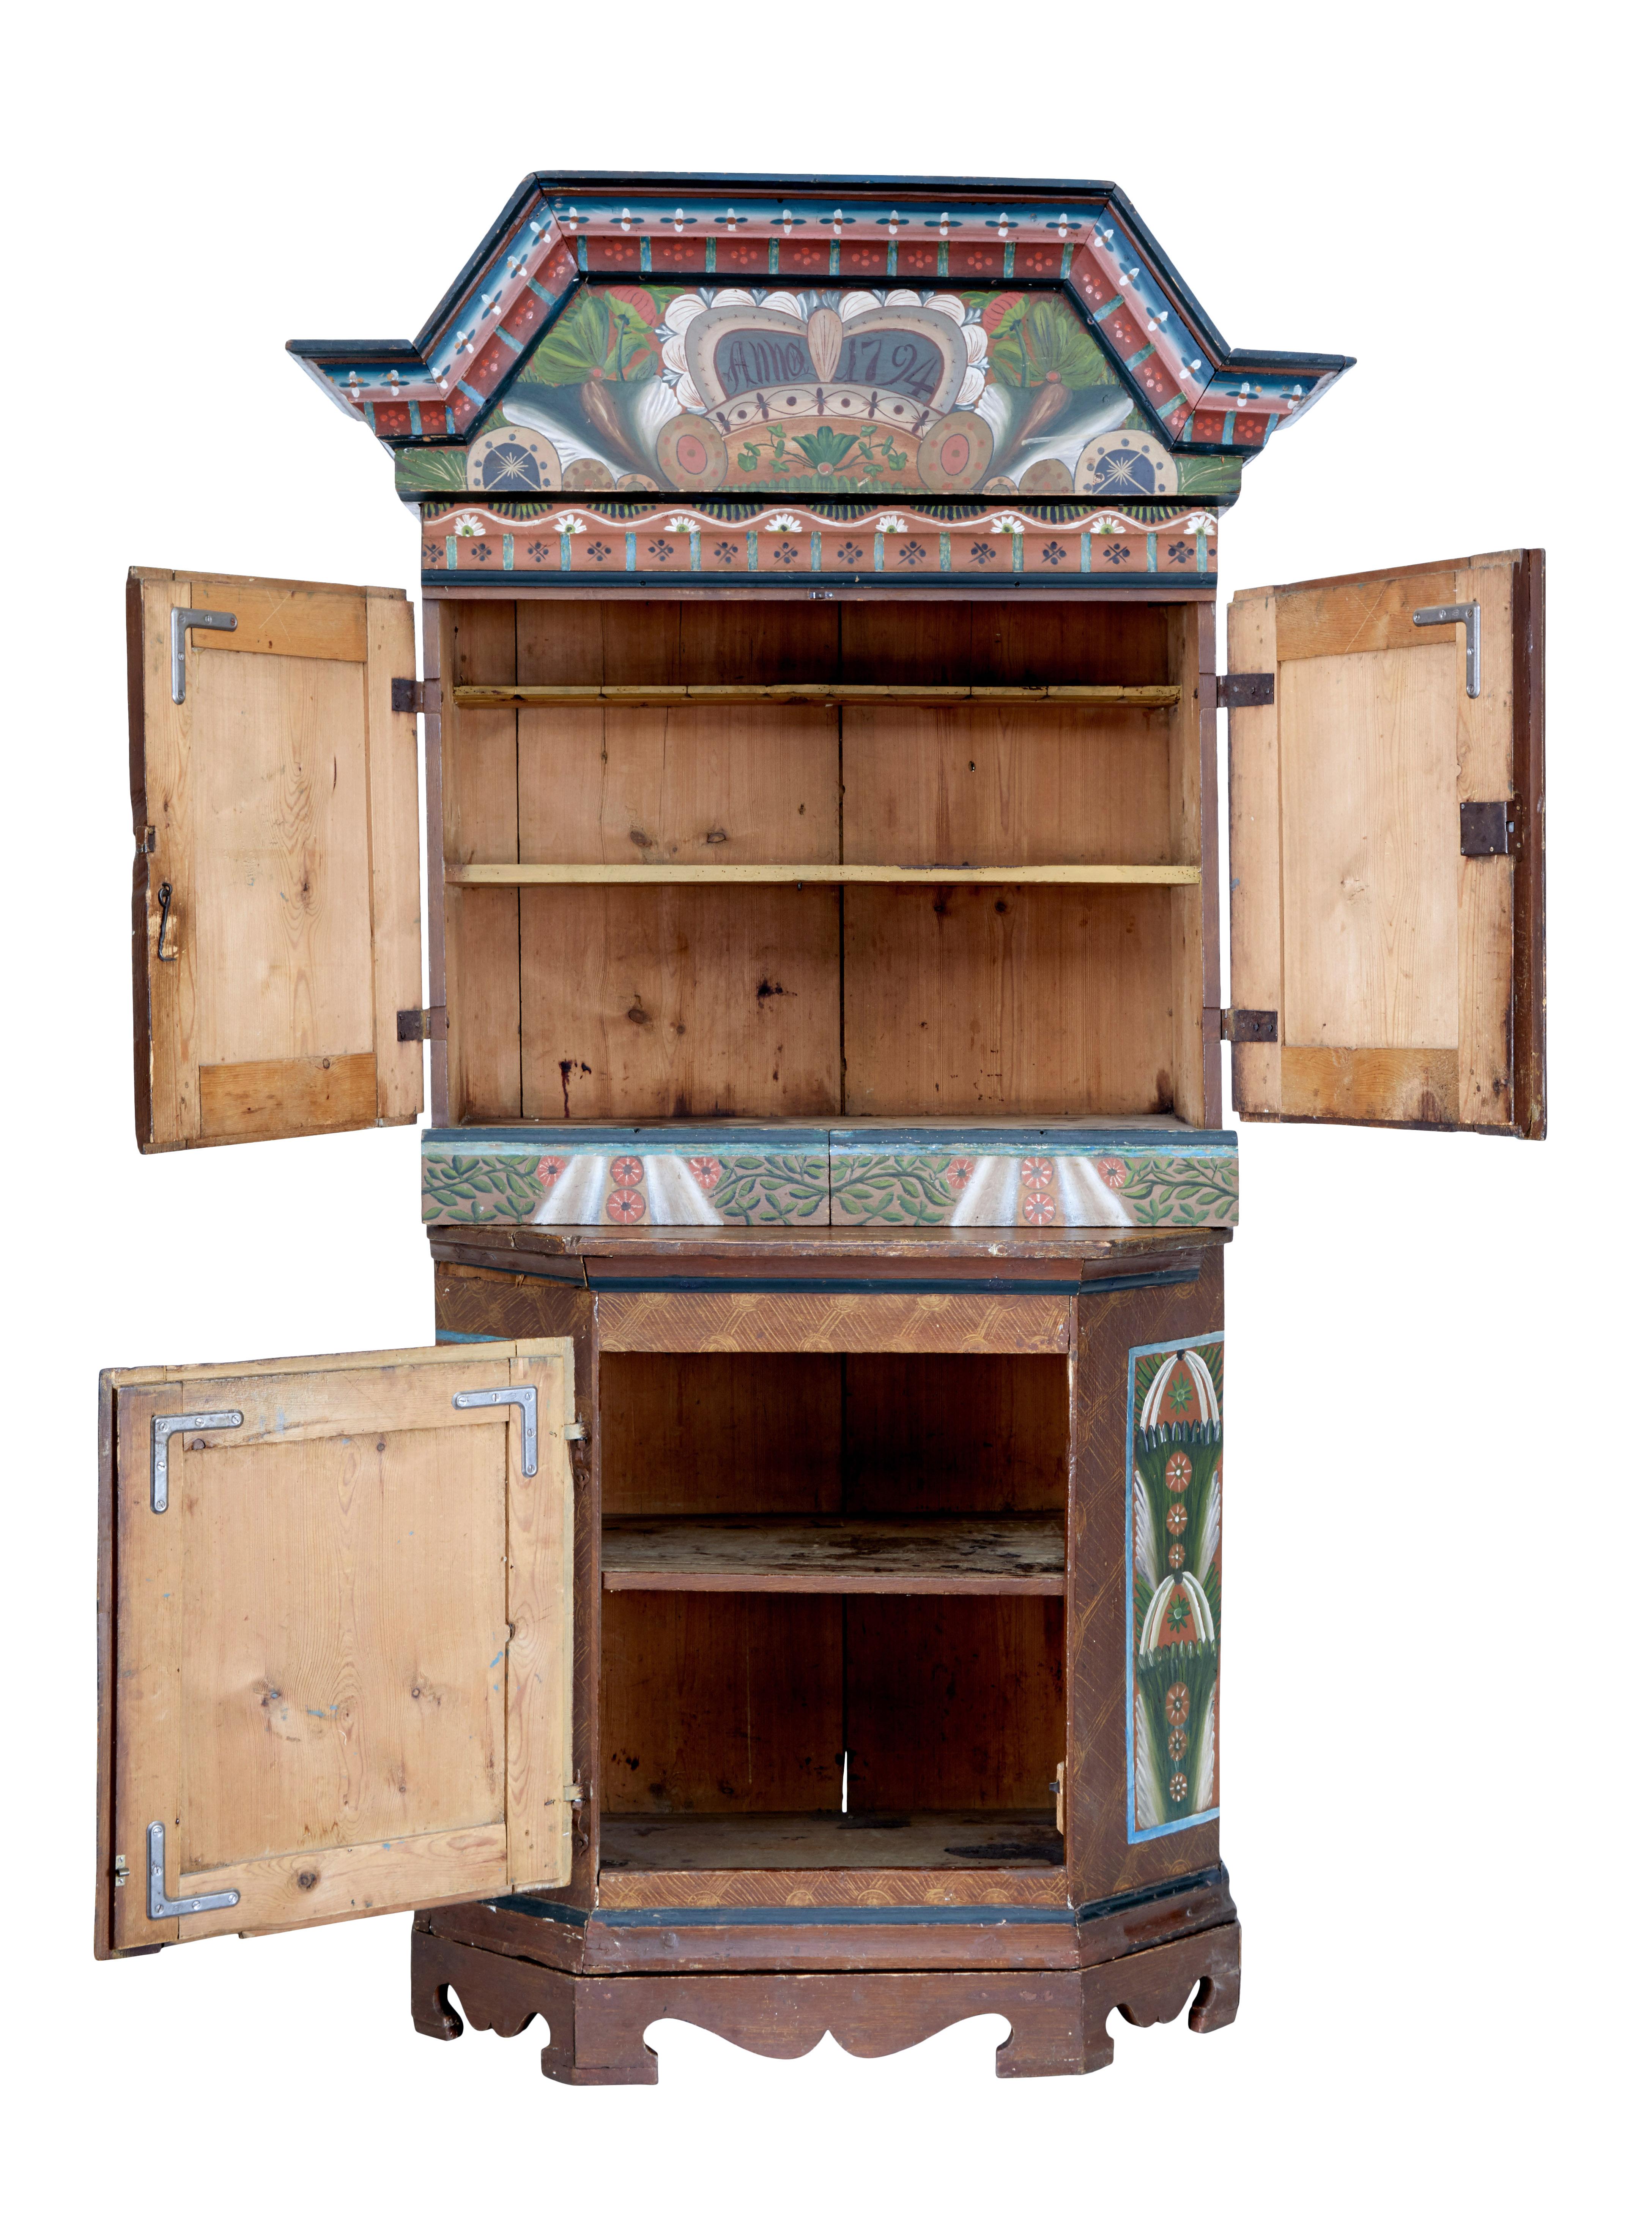 Swedish late 18th century hand painted folk art cupboard circa 1794.

Good quality traditional painted scandinavian cupboard, comprising of a removable cornice and a main body which stands on a seperate base.

Hand painted in brown, orange, blue